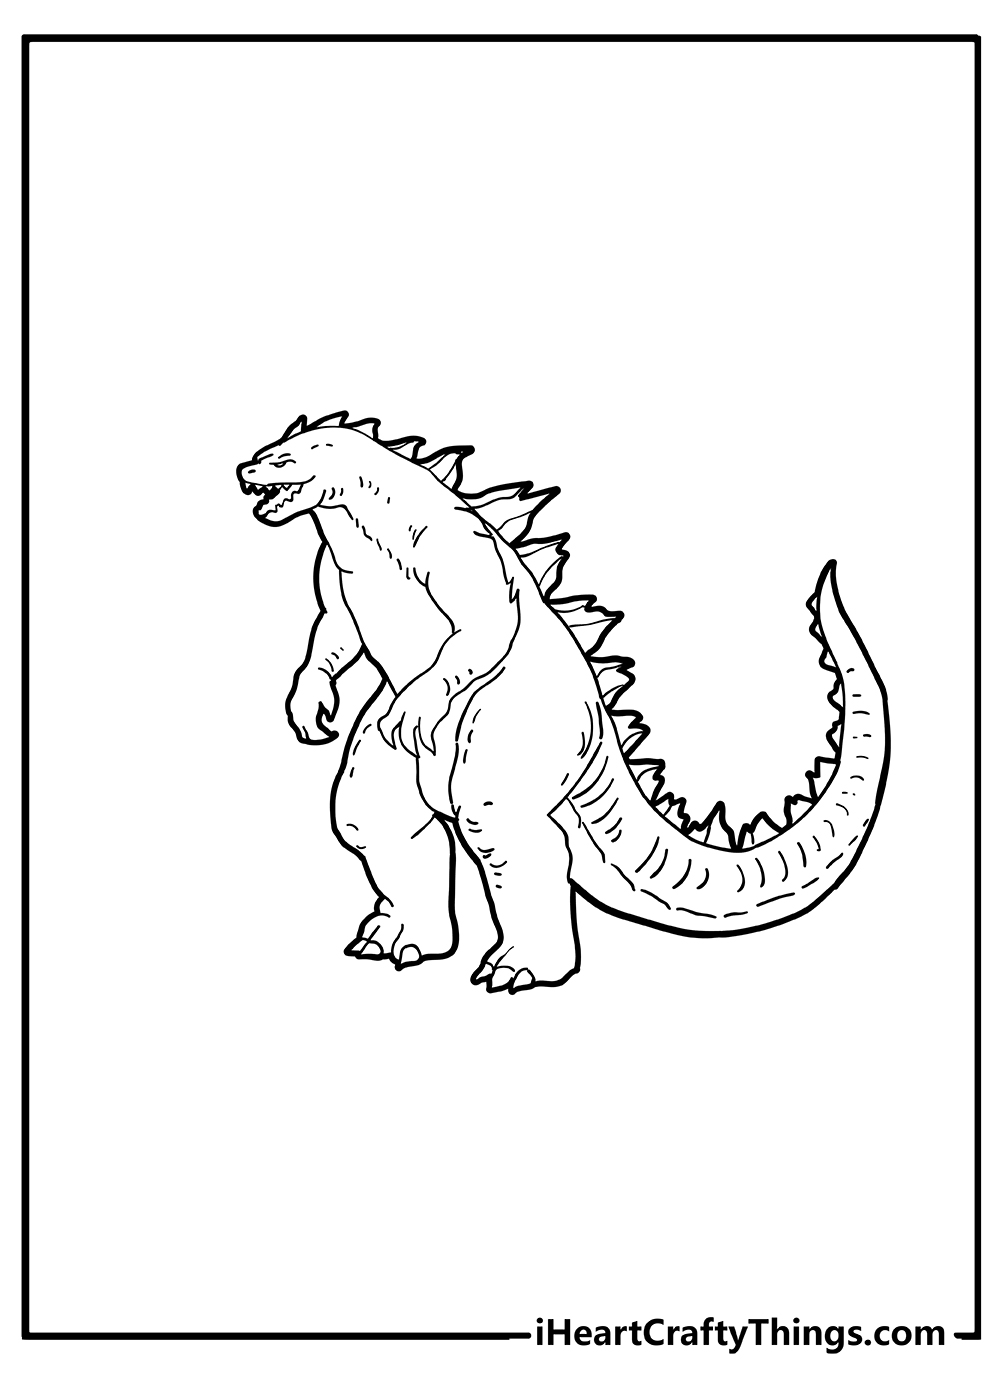 Godzilla Easy Coloring Pages